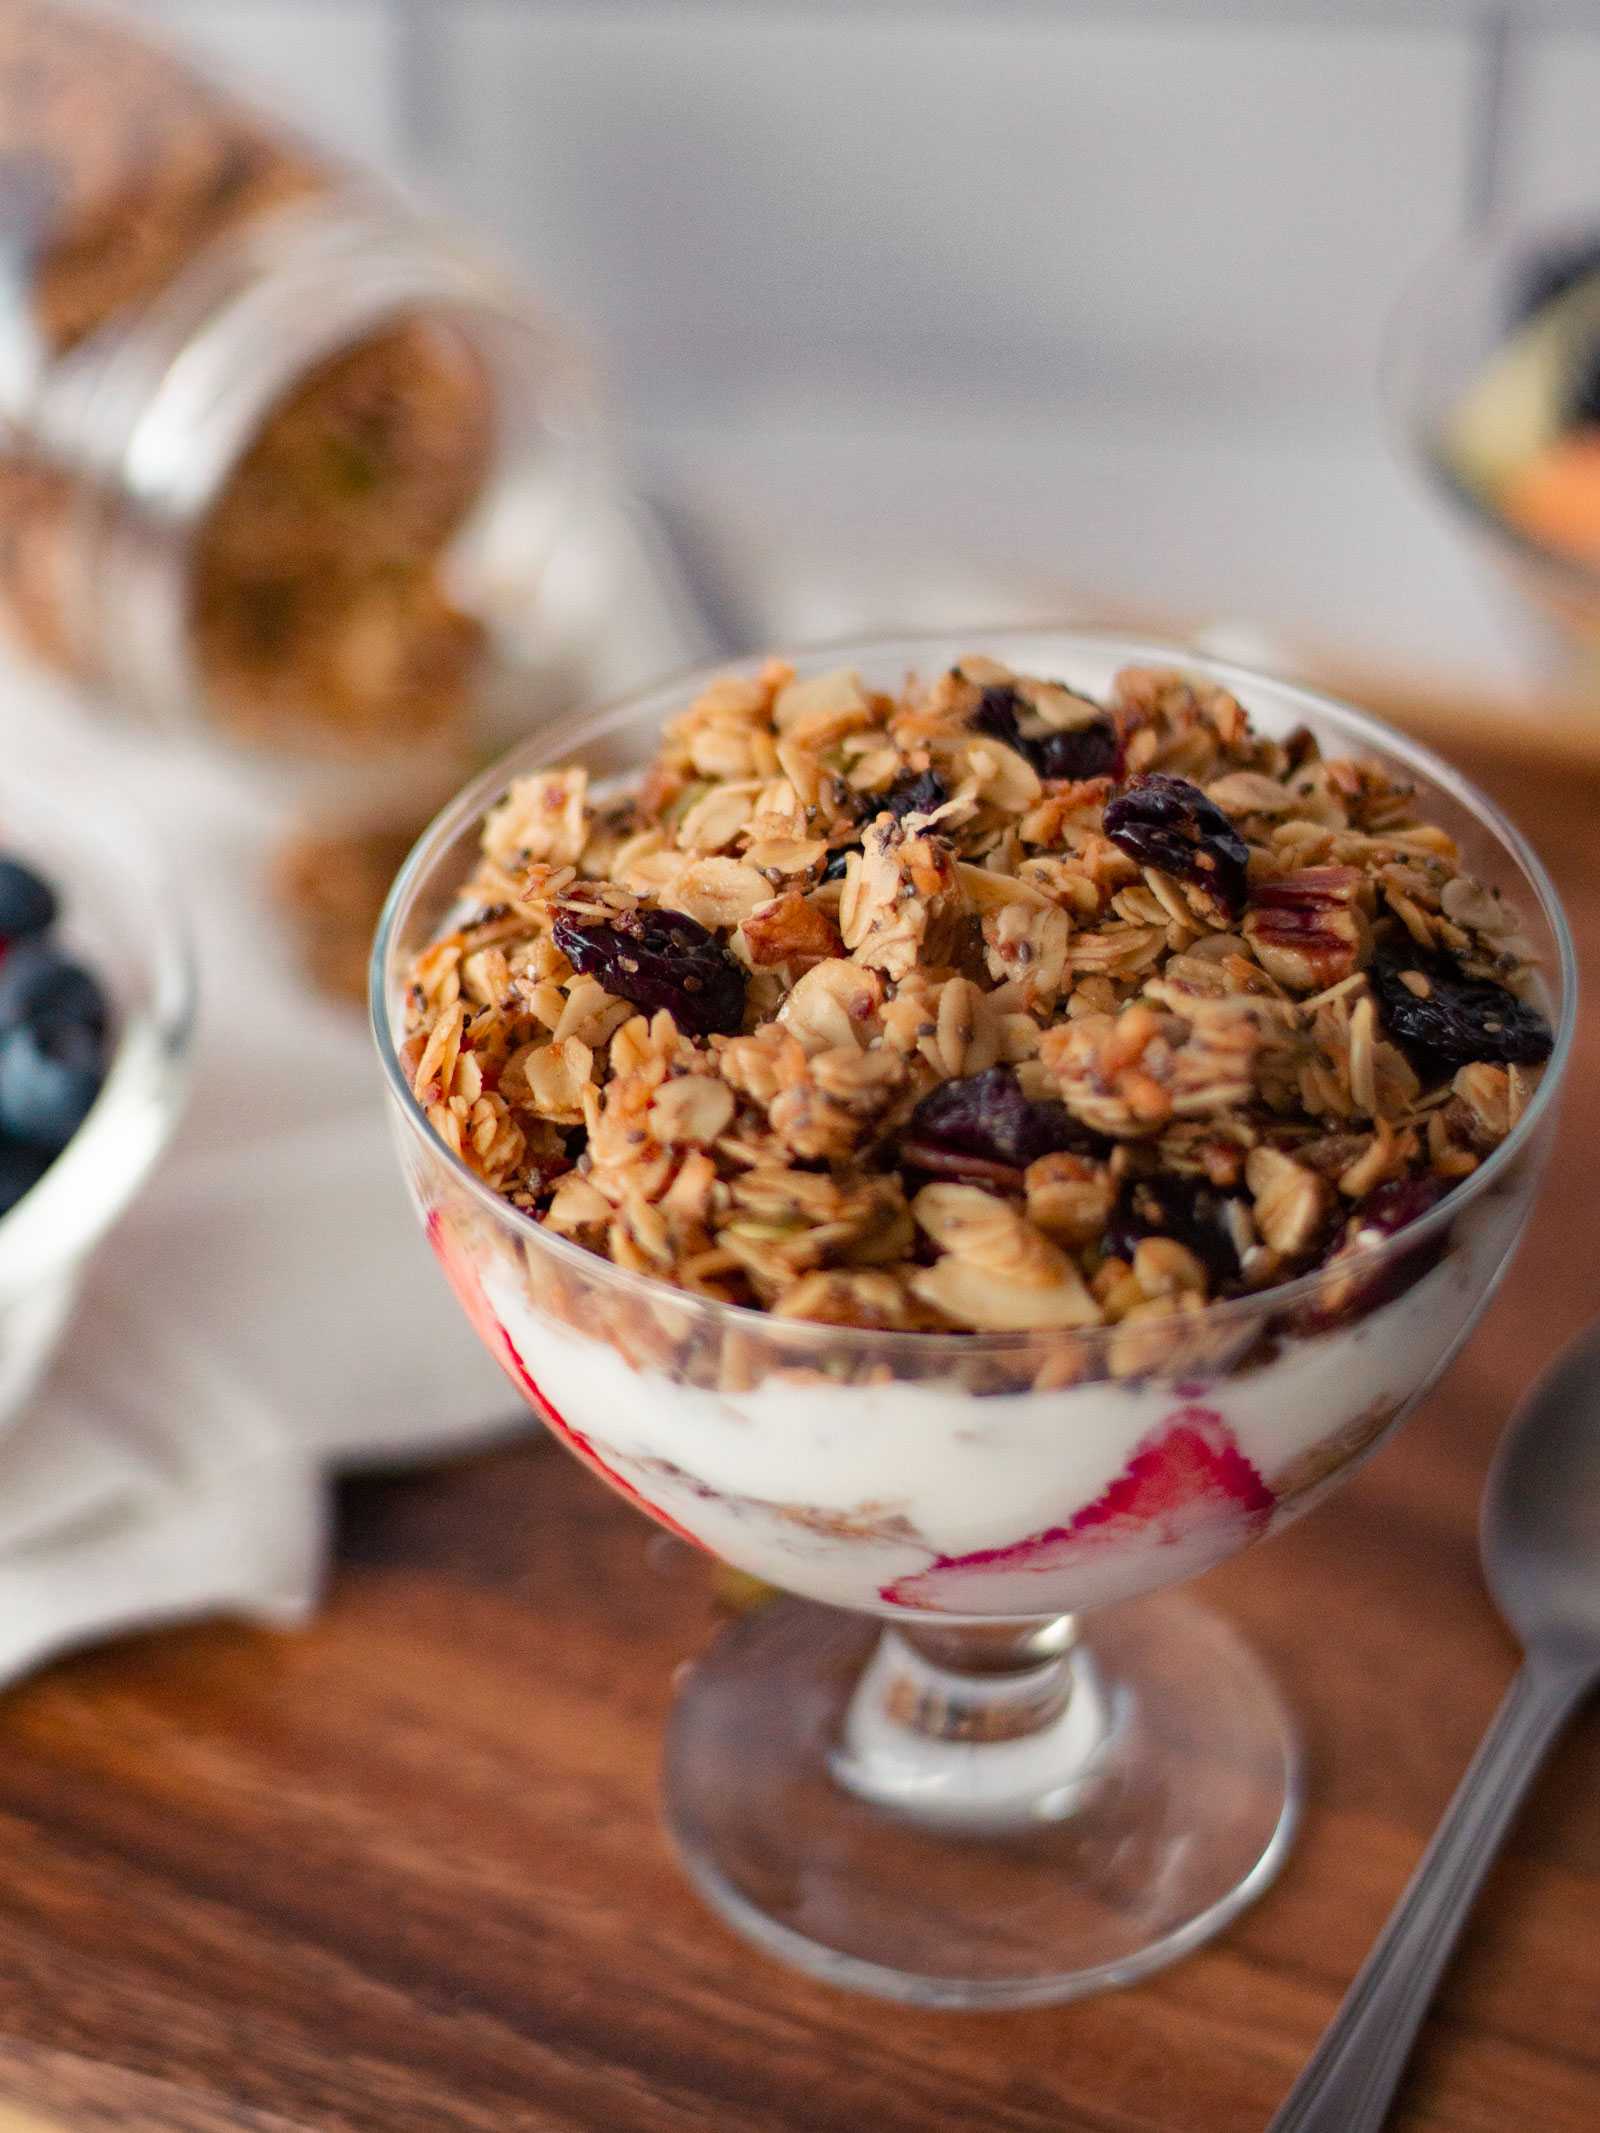 Oliver's granola is one of our favourite additions to the library. In this image, Oliver's granola is part of a delicious yogurt parfait. This hearty recipe combines simple ingredients to get great results.